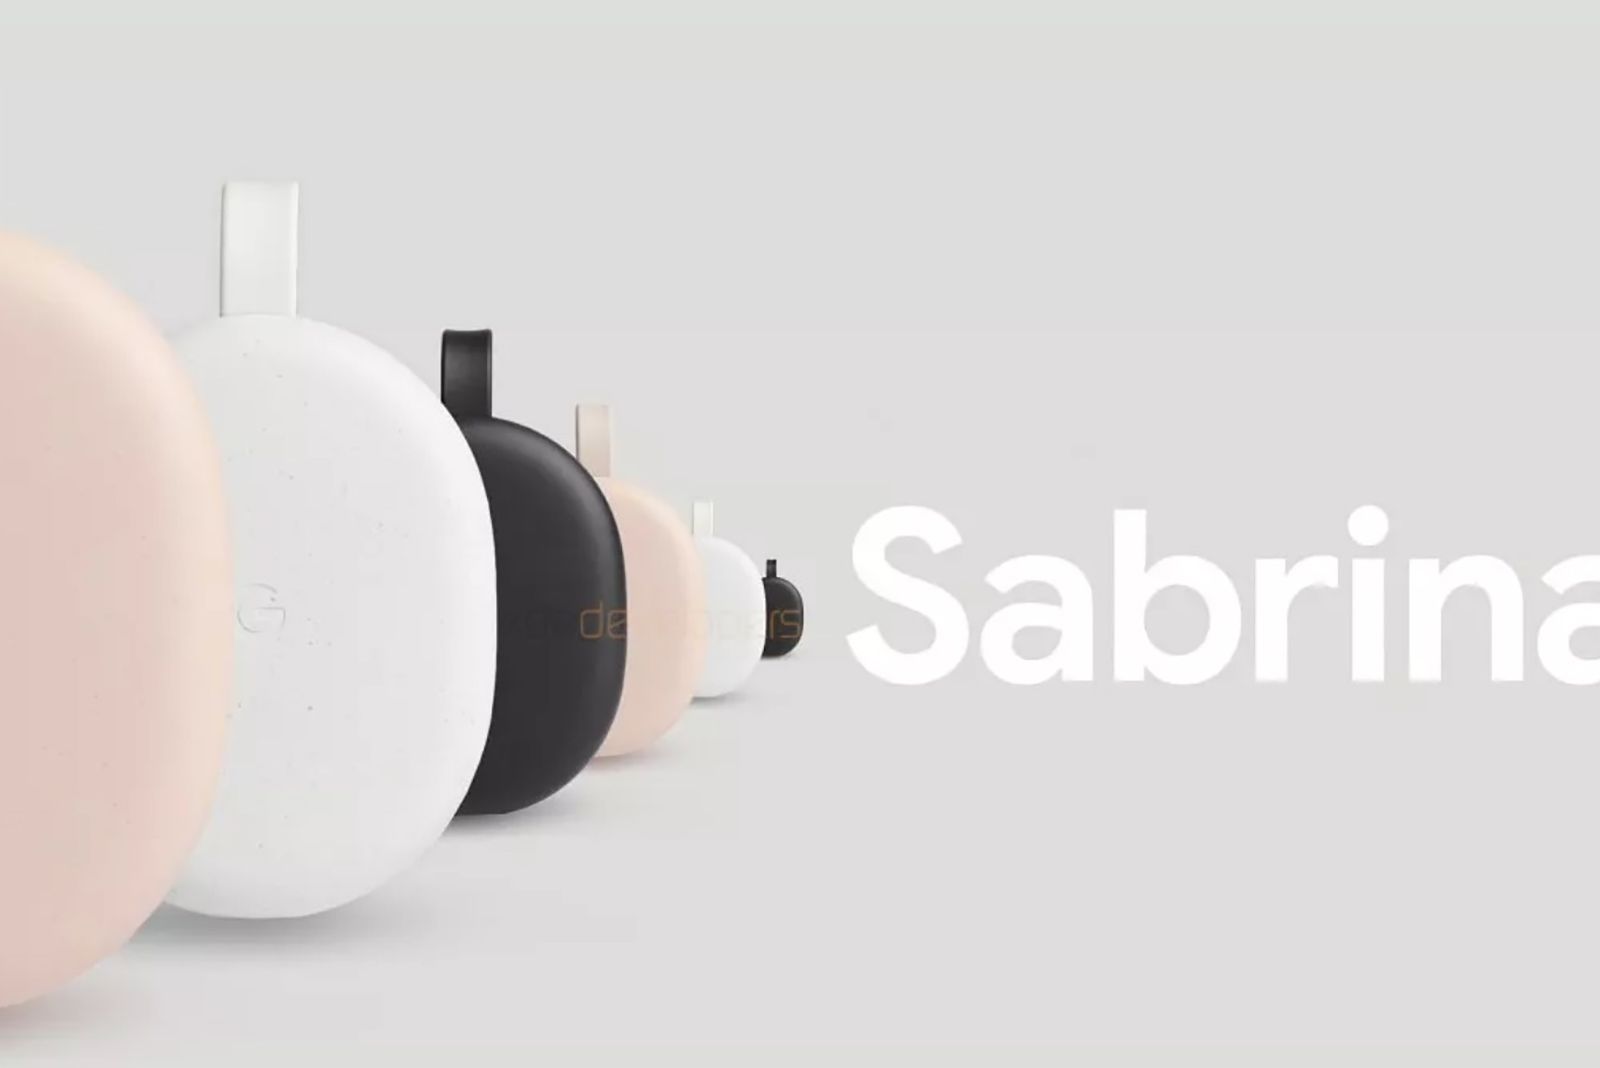 Google new 'Sabrina' Chromecast may have just hit the FCC, with its remote photo 1